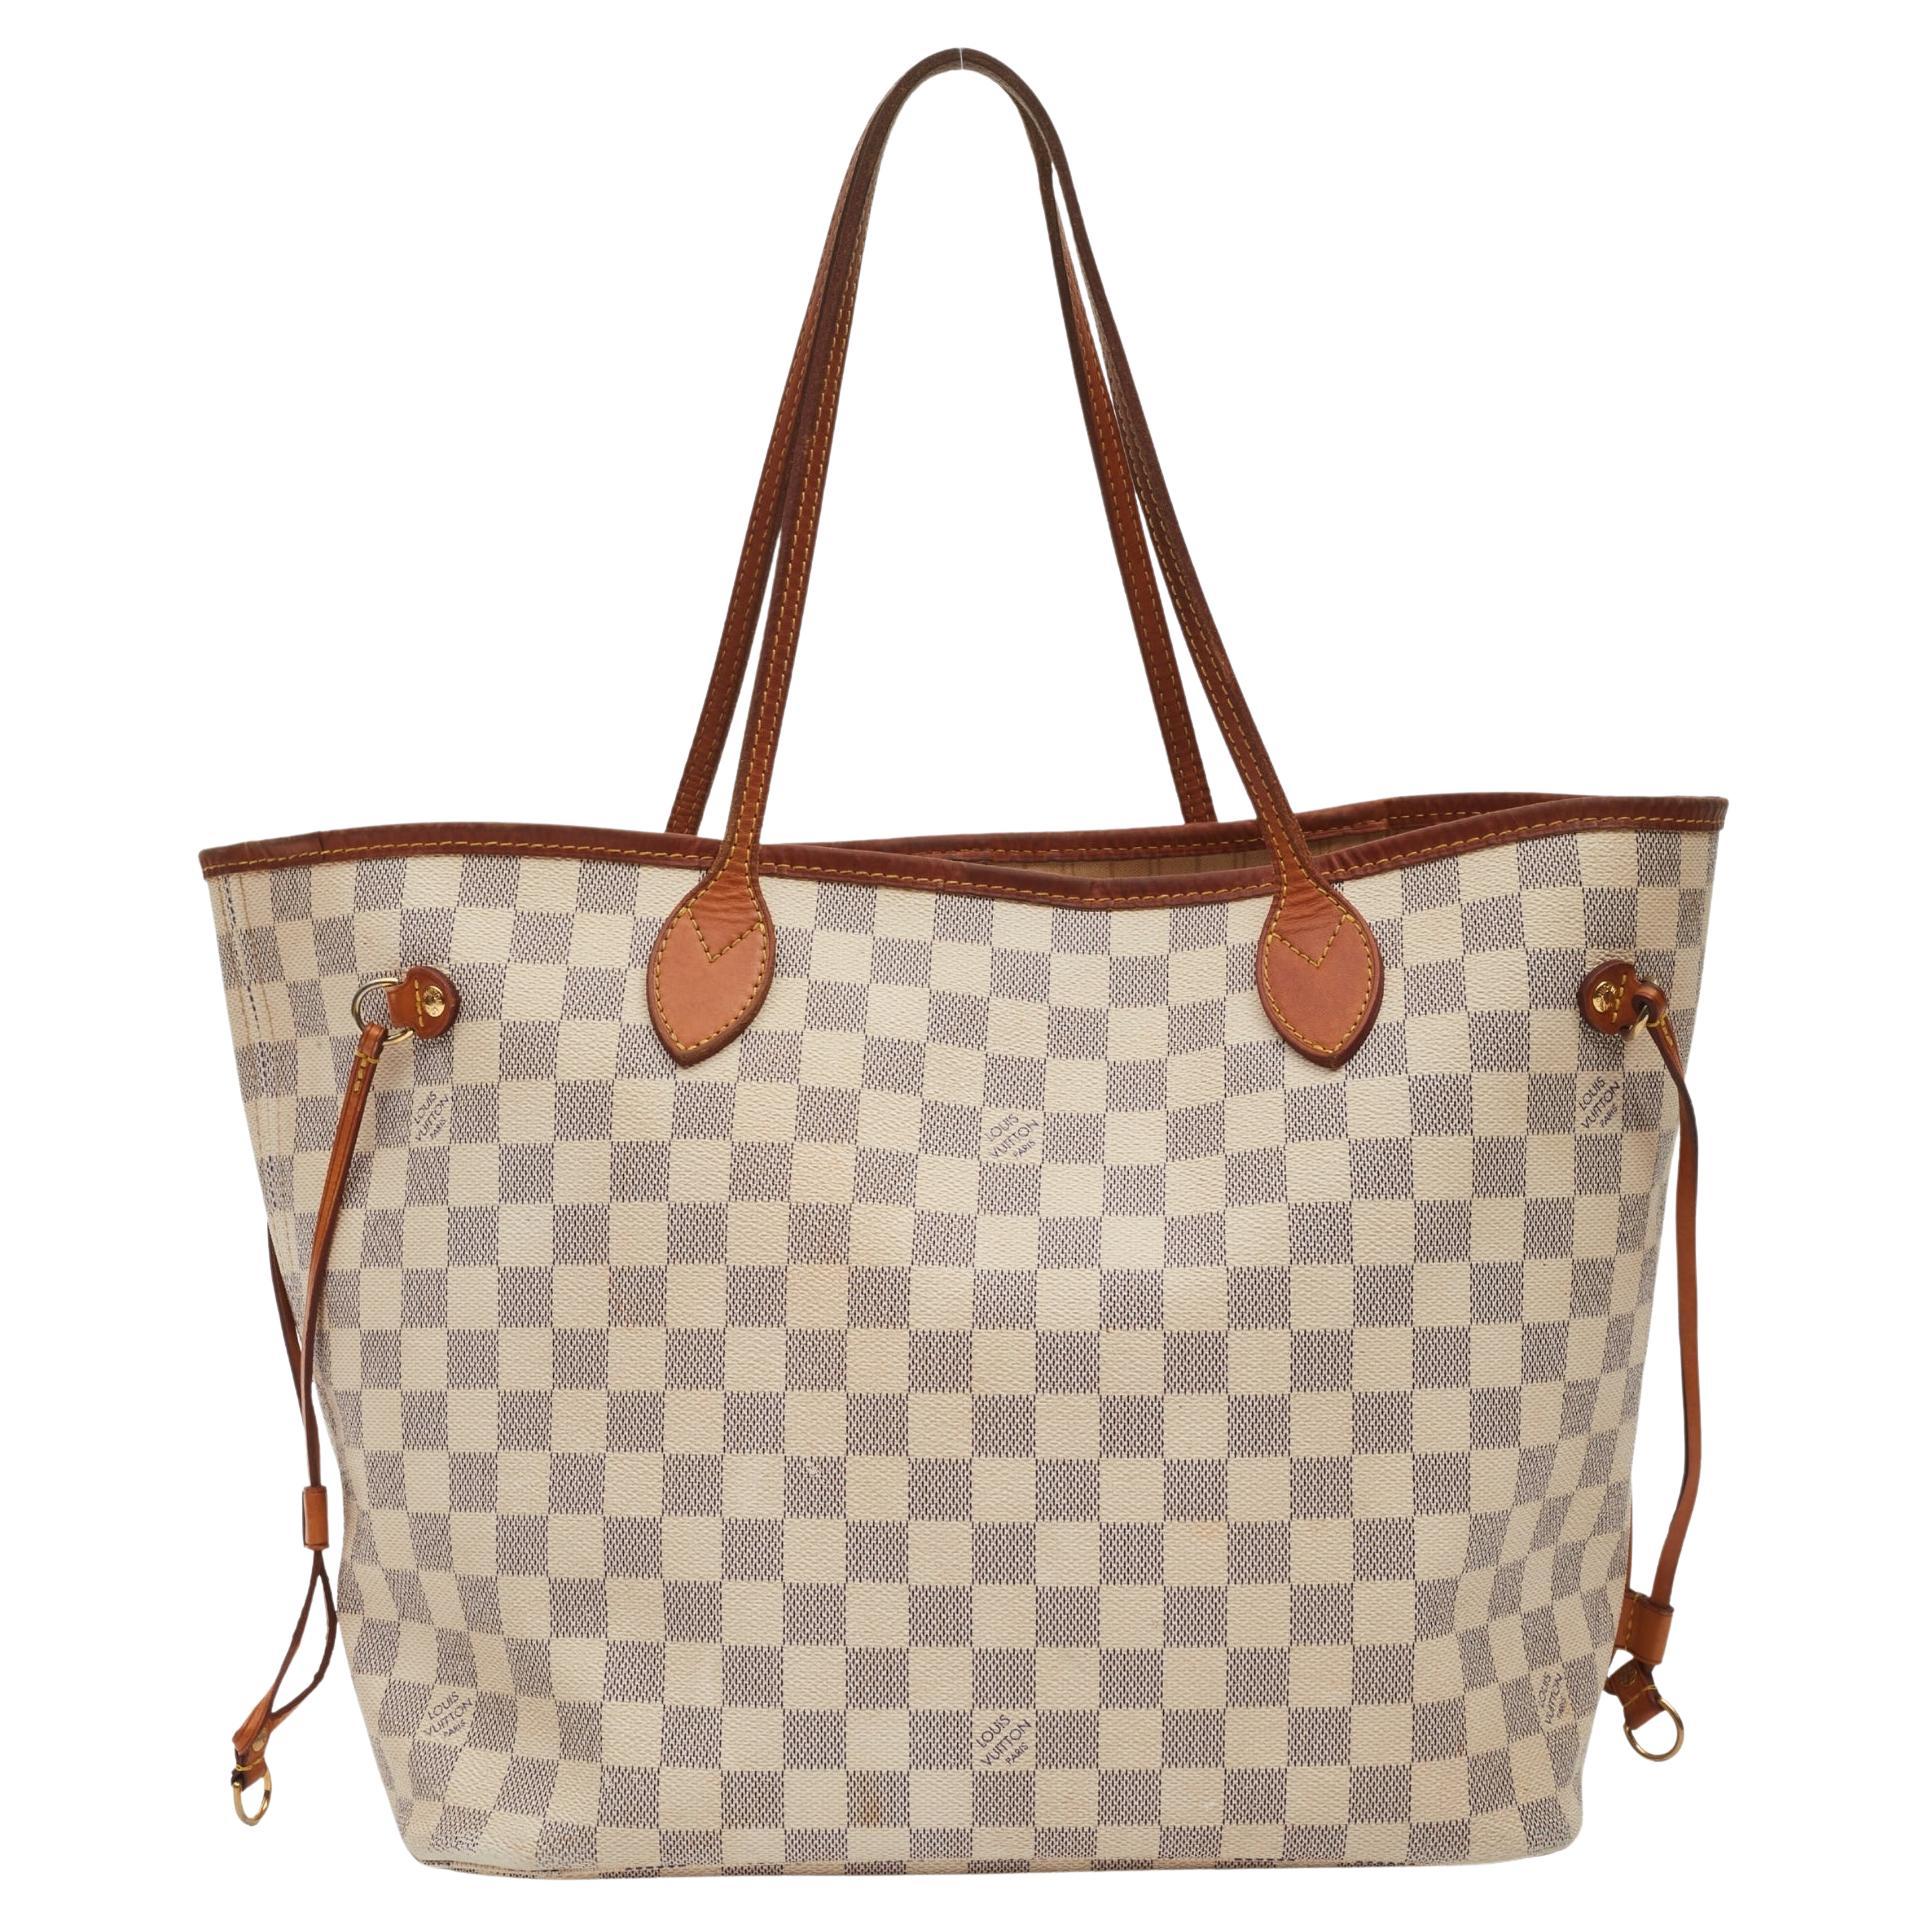 Does the Louis Vuitton Neverfull bag have a serial number?